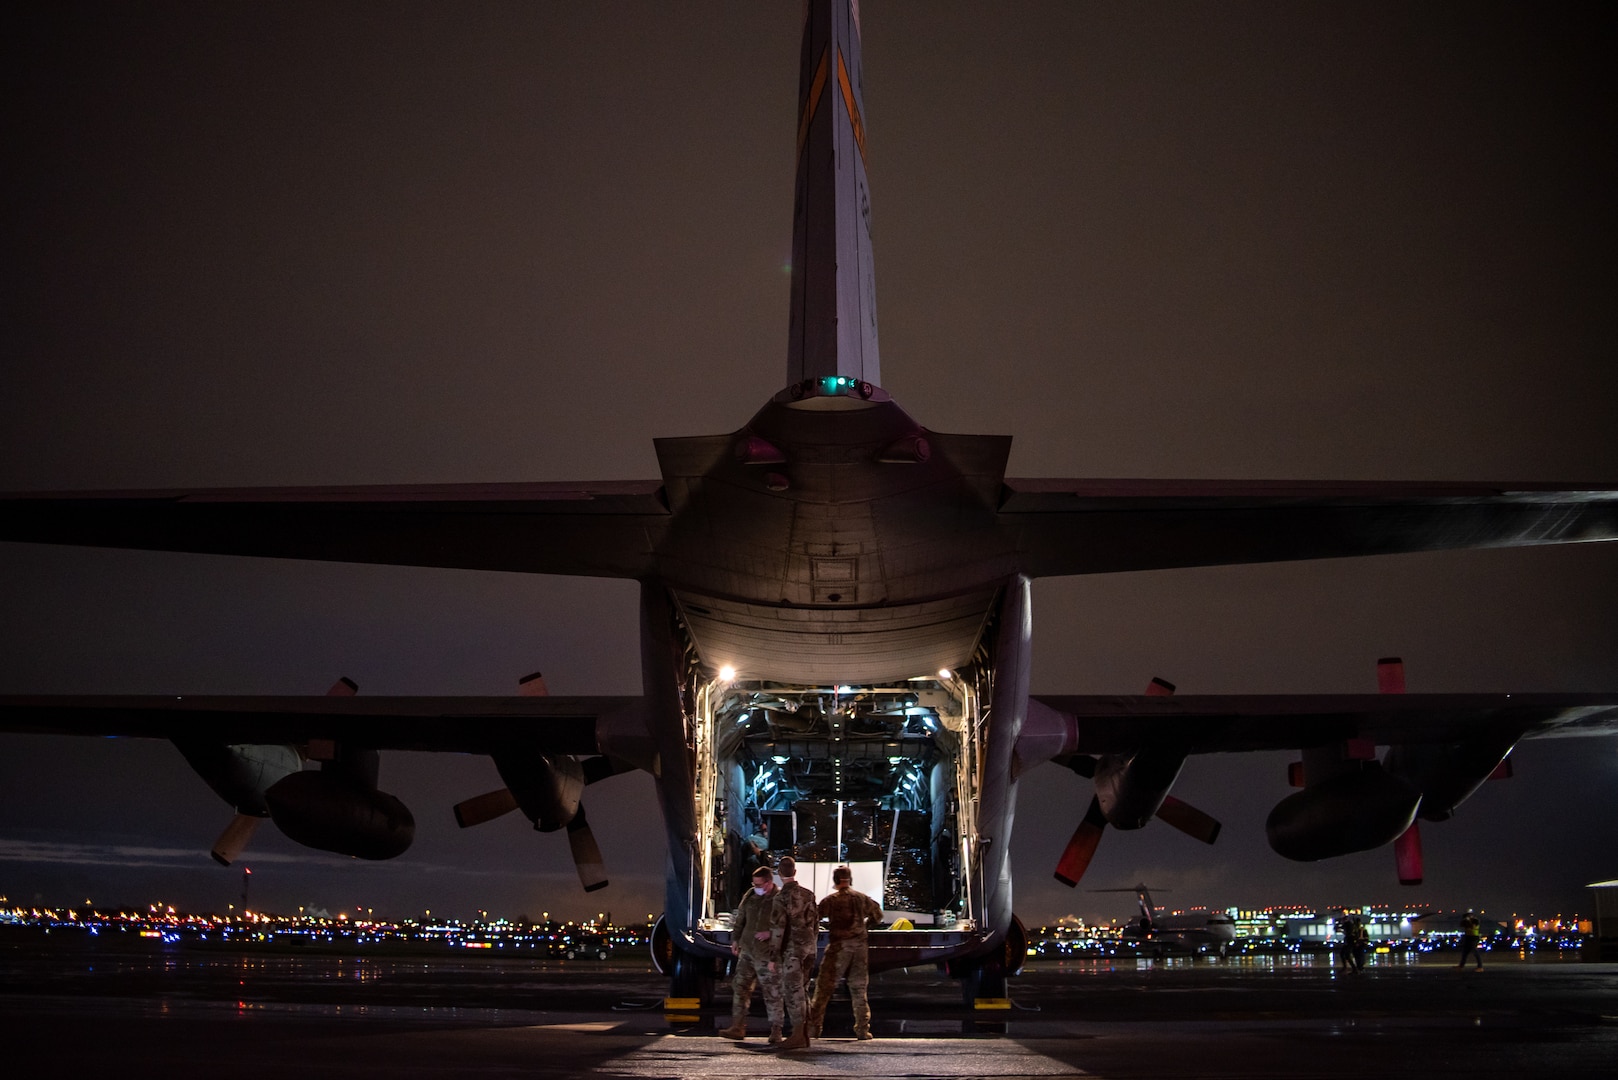 A C-130H Hercules aircraft assigned to the 182nd Airlift Wing, Illinois Air National Guard, delivers 250 medical isolation pods to Chicago Midway International Airport, Chicago, Ill., April 8, 2020. Two 182nd Airlift Wing C-130 aircraft and aircrews flew the pods cross-country and overnight in a homeland defense mission for use at the McCormick Place COVID-19 alternate care facility. (U.S. Air Force Photo by Senior Airman Jay Grabiec)